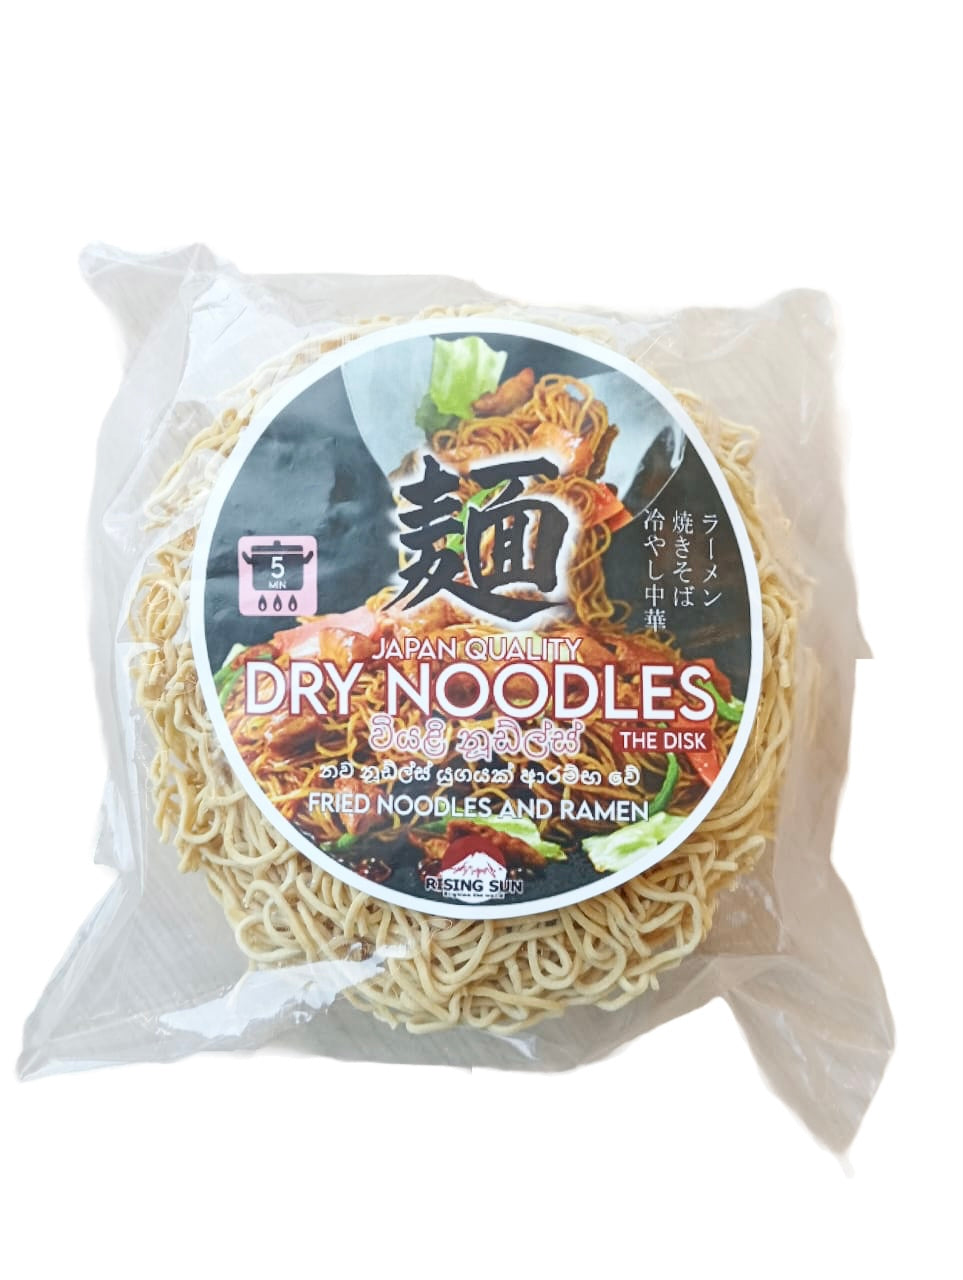 Dry Noodles Disk 400g - Rising Sun